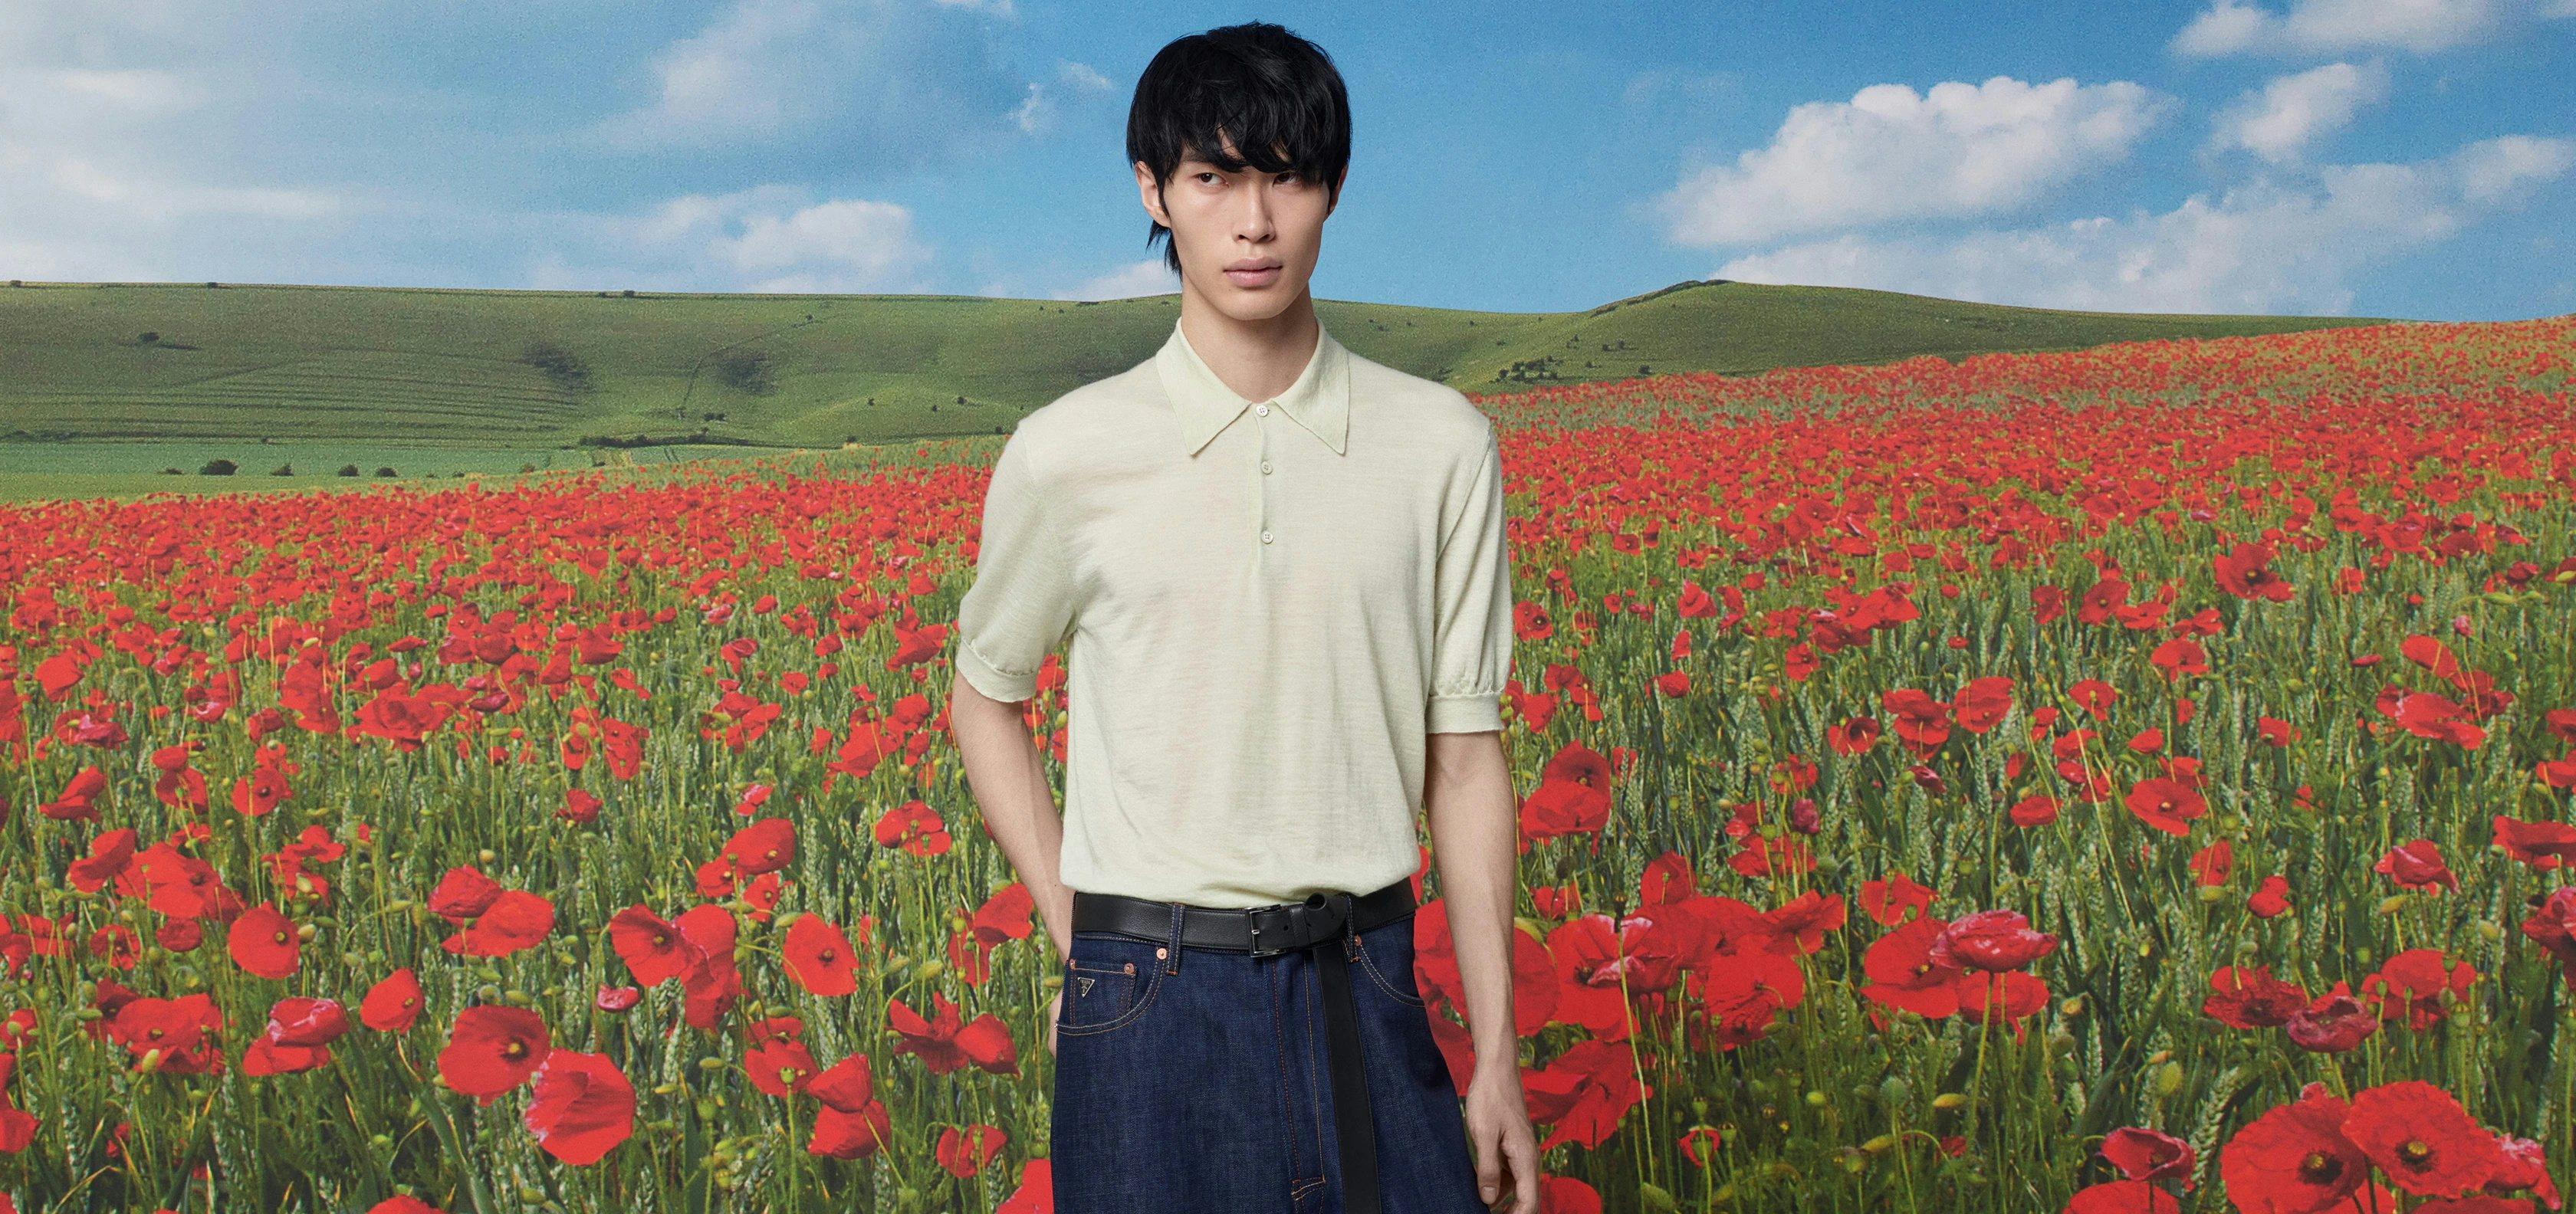 Shot by Marco Lessi, model Zhewei Guo stands in a field of poppies. Photo: Prada